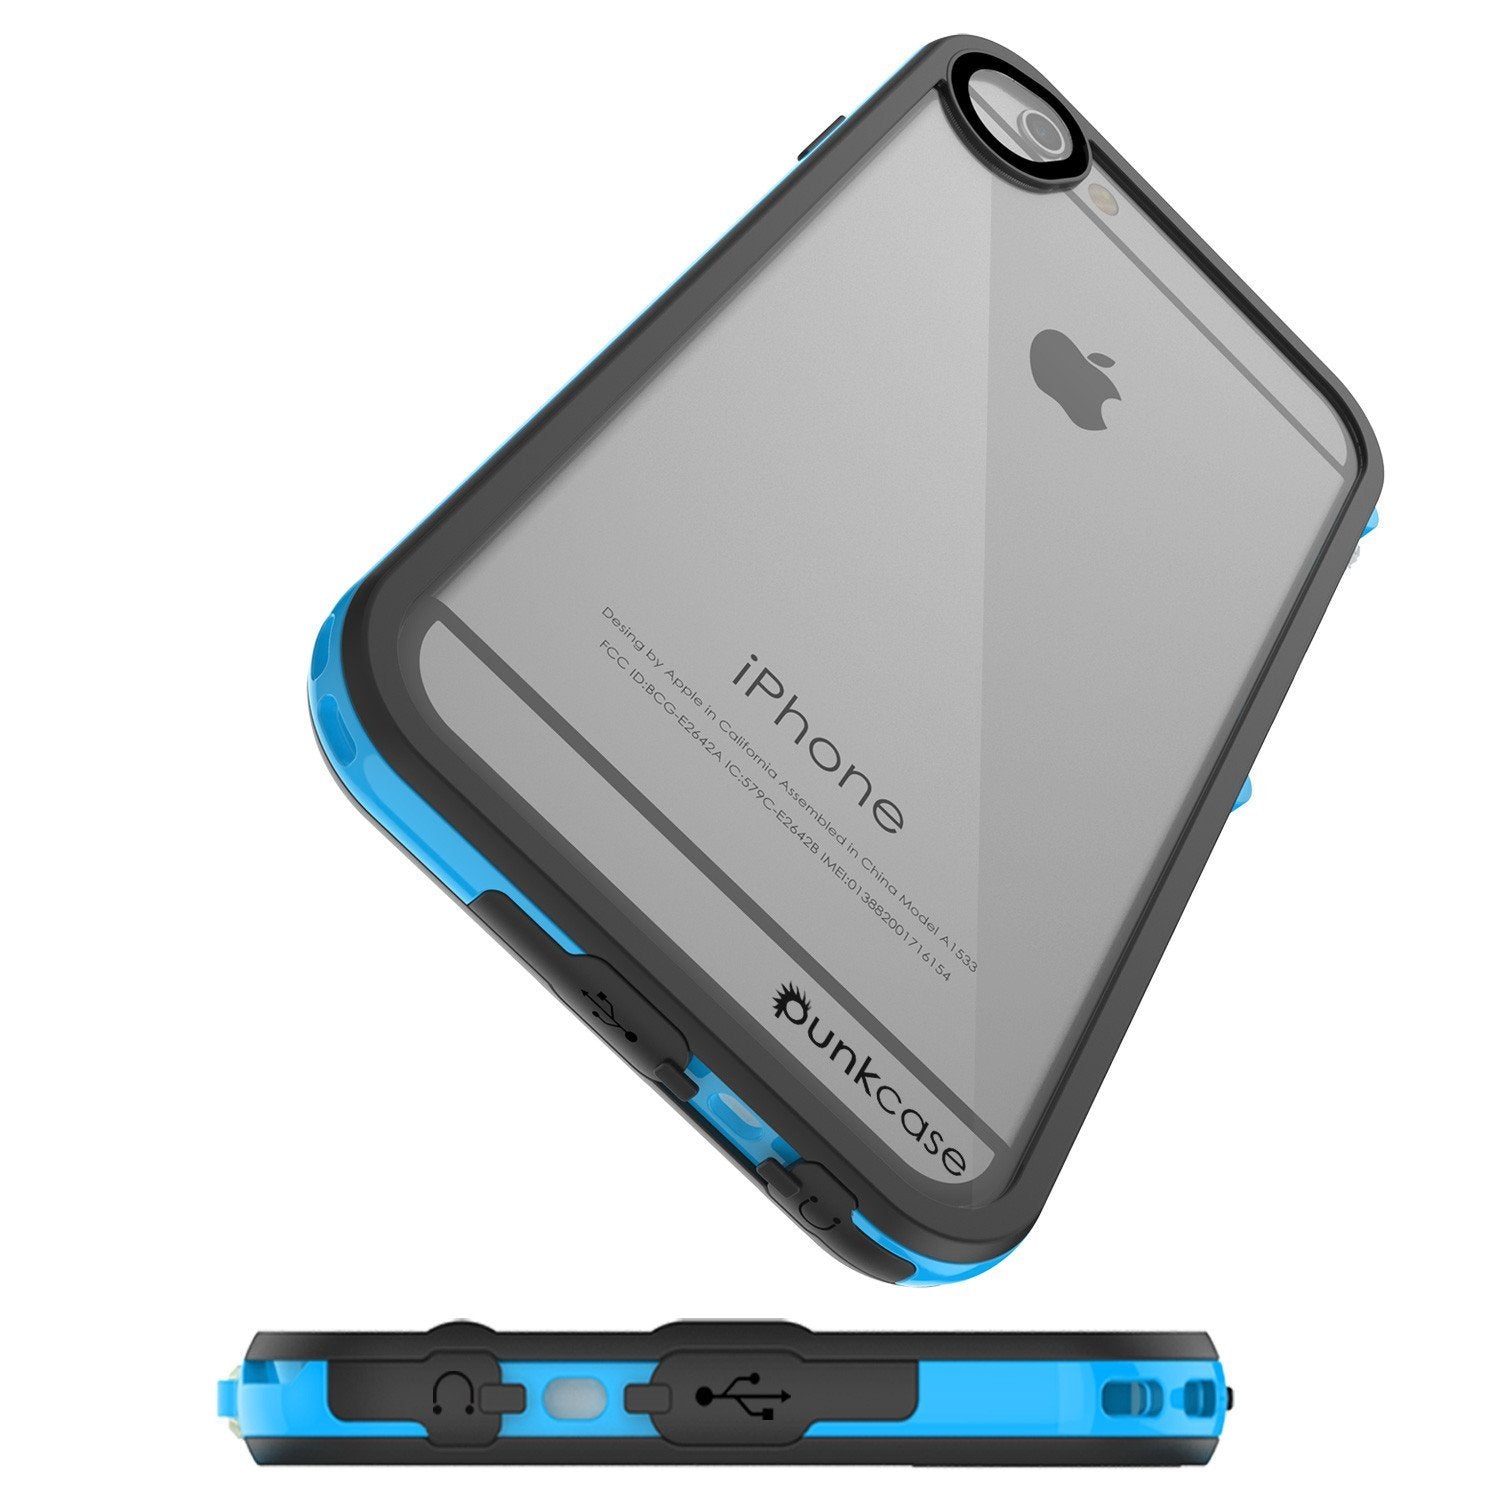 Apple iPhone 8 Waterproof Case, PUNKcase CRYSTAL 2.0 Light Blue  W/ Attached Screen Protector  | Warranty - PunkCase NZ